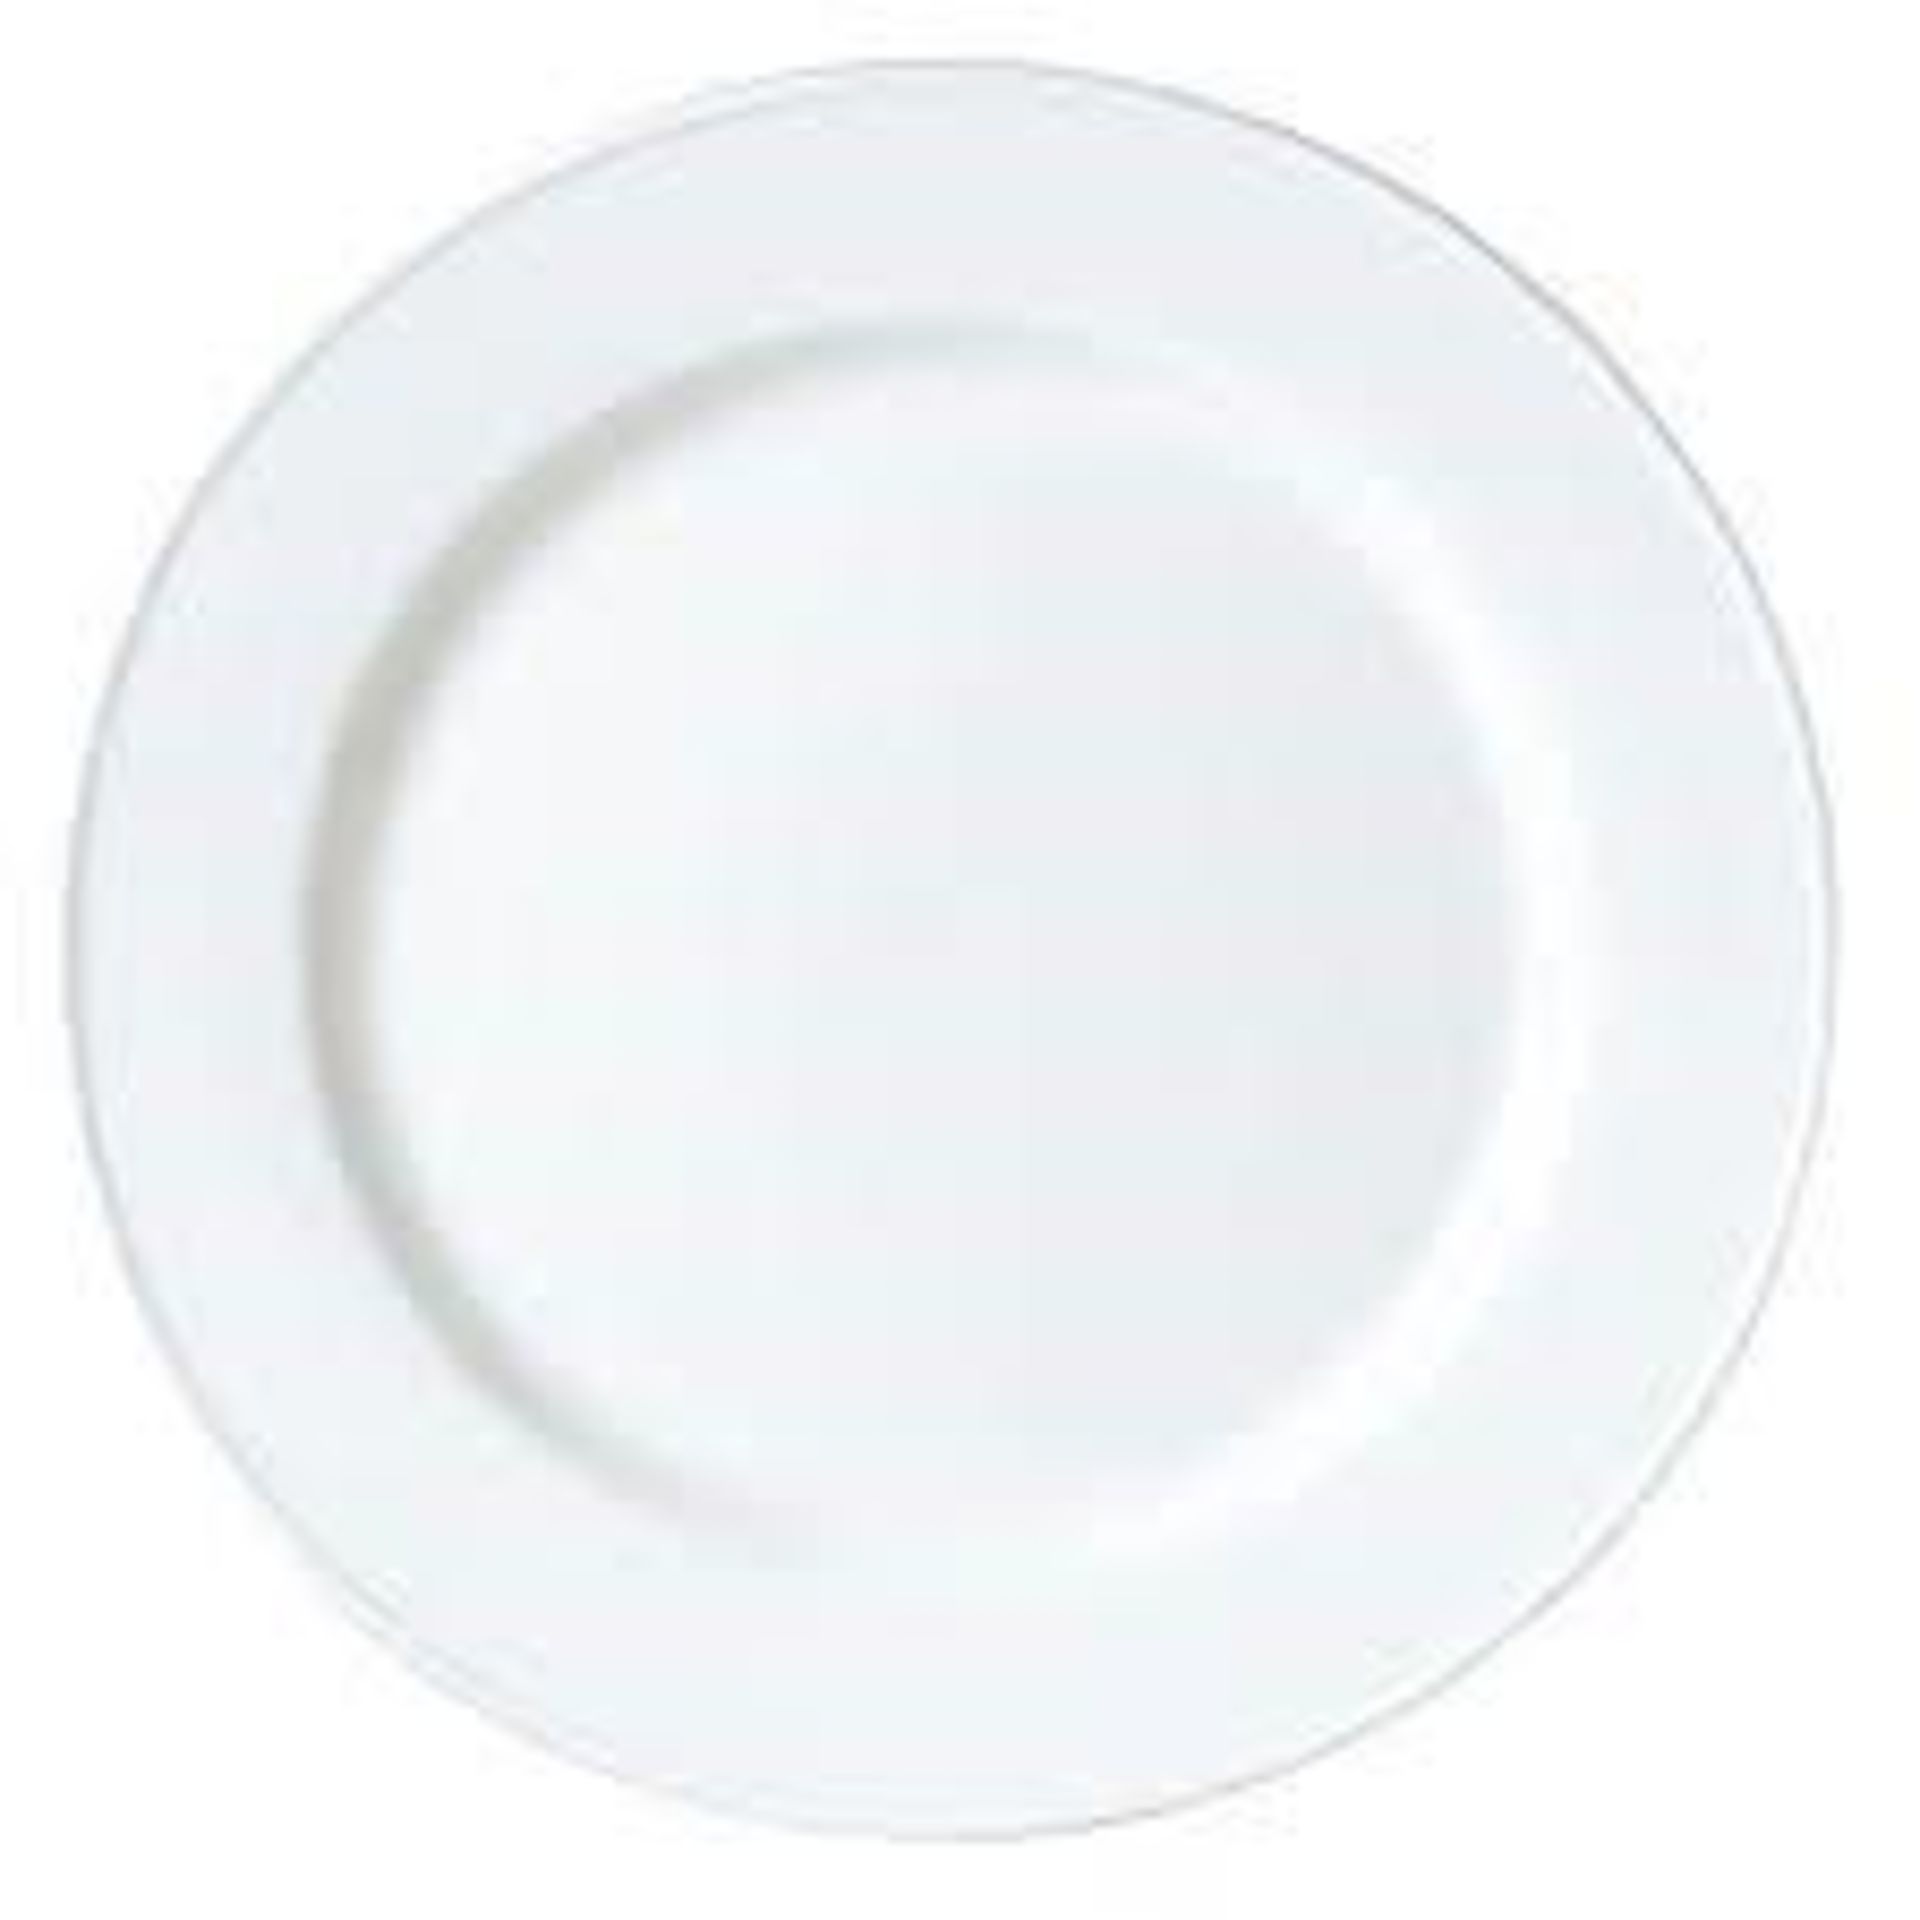 14 x Steelite Simplicity Commercial Oval Plates in White - 342mm - Ref- V0032 - CL011 - 12341 - MC5